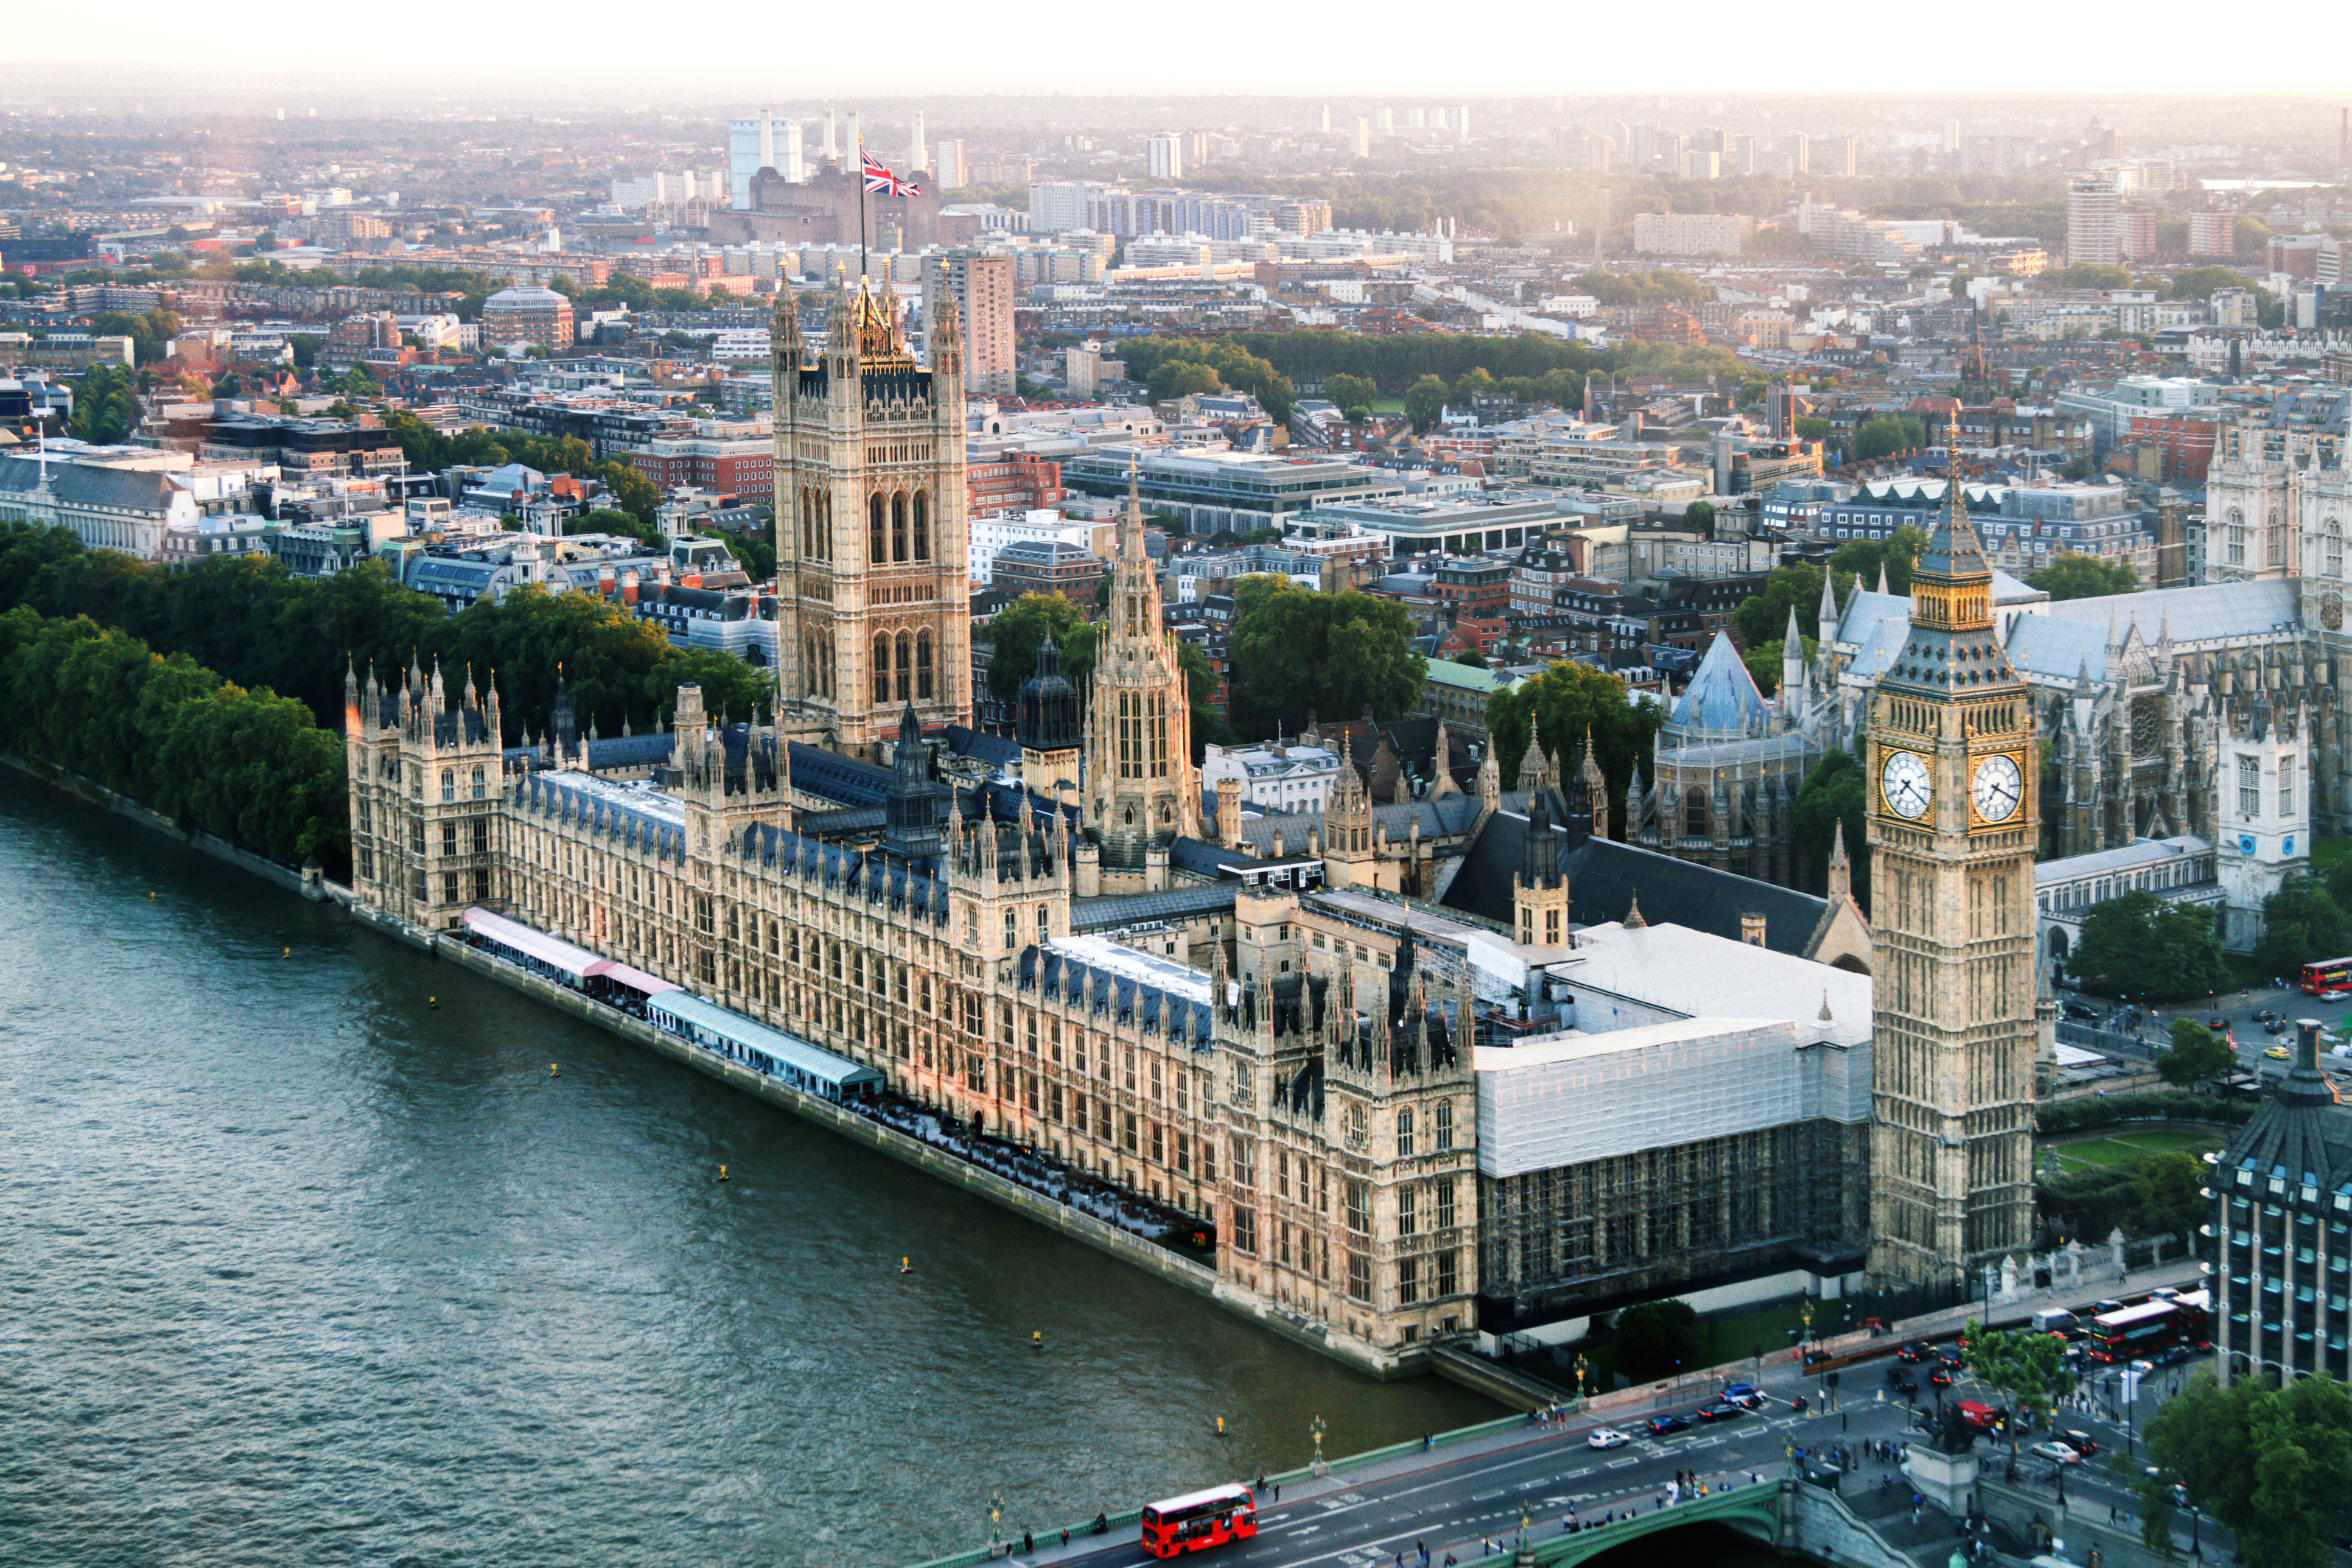 View of Big Ben and Parliament in London, England